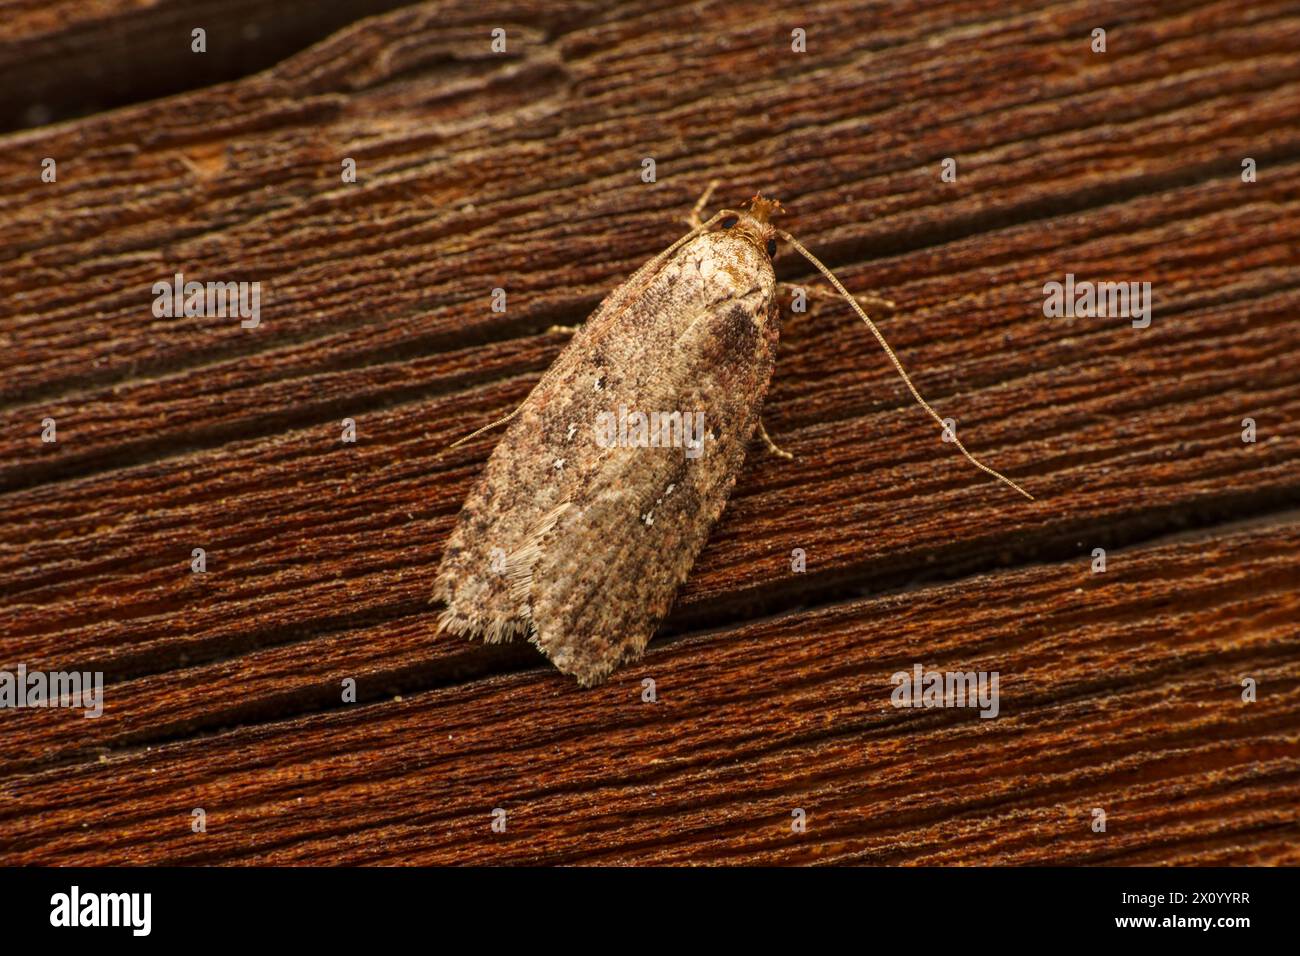 Agonopterix heracliana Family Depressariidae Genus Agonopterix Common Brindled Brown moth Common Flat-body moth wild nature insect photography, pictur Stock Photo